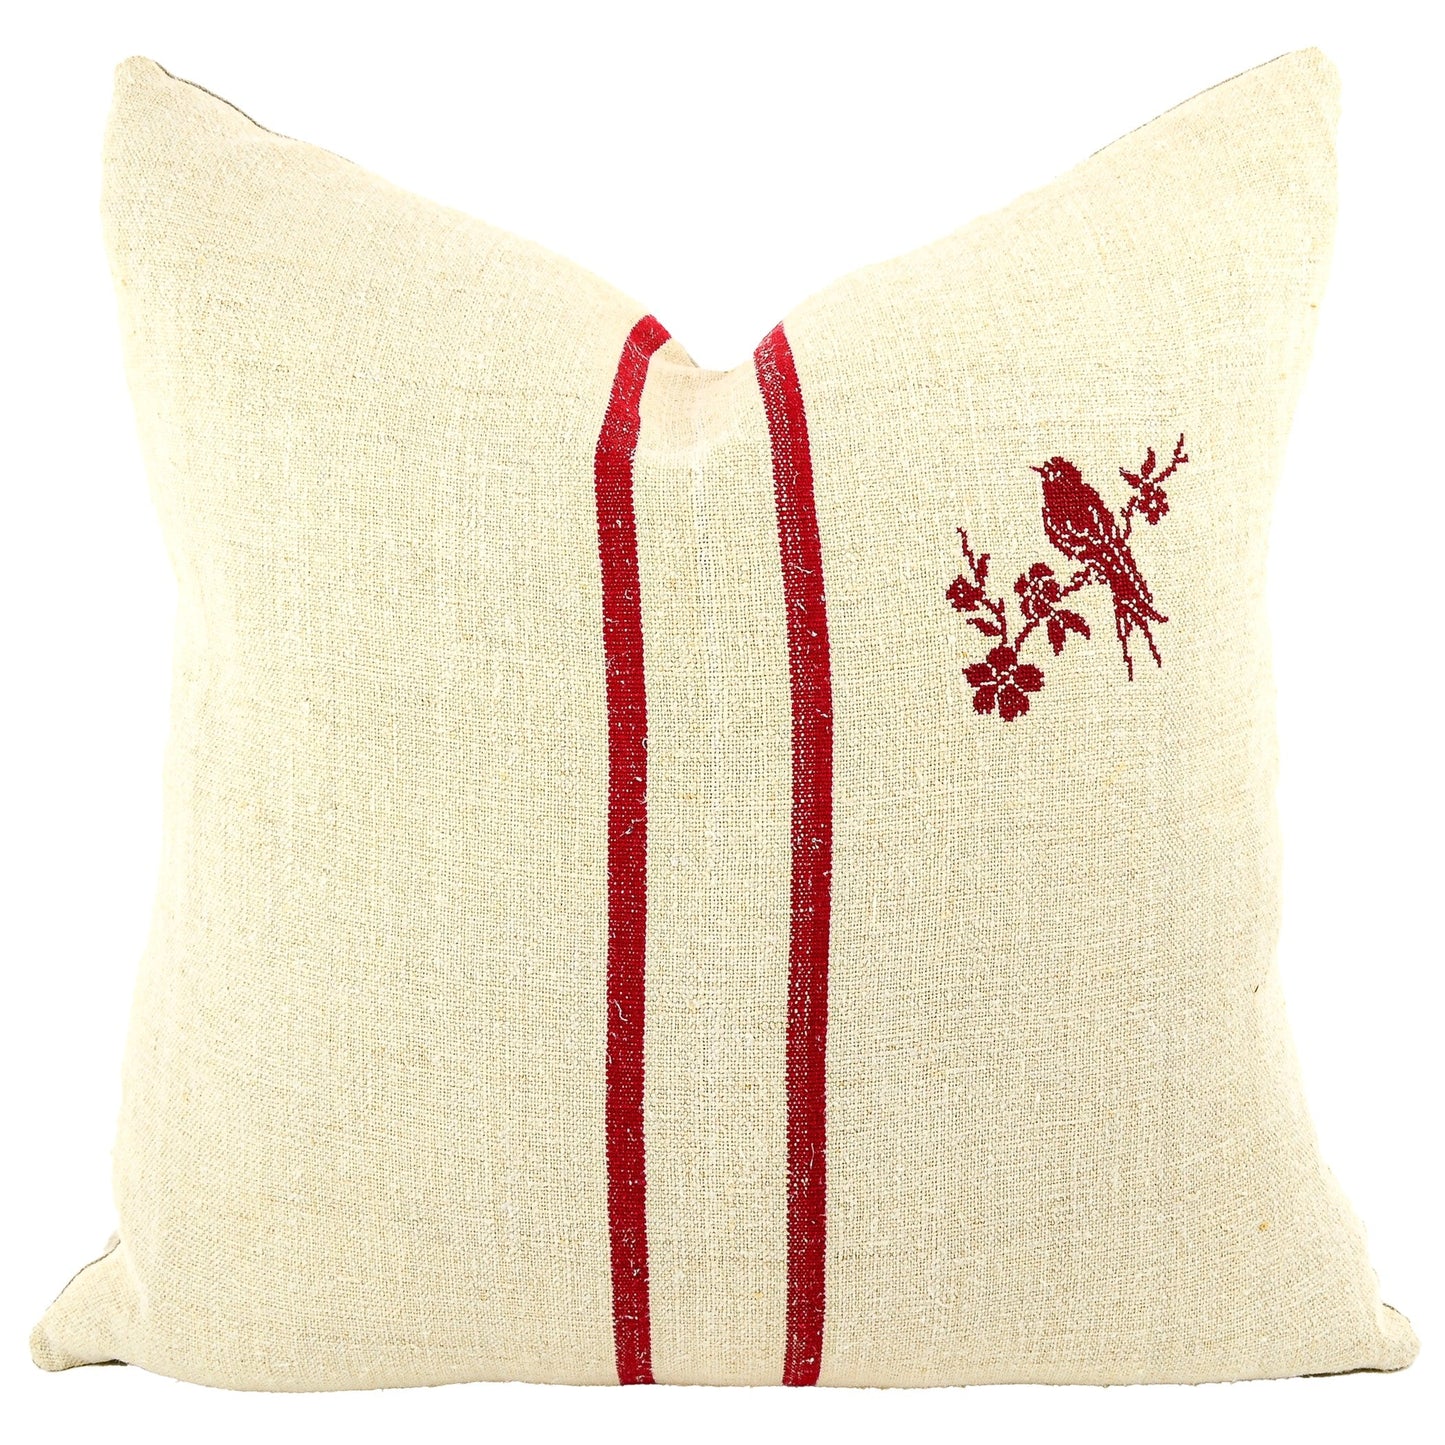 Front of pillow made from antique European grain sack natural tone linen with deep French red stripes that are perfectly complemented by a red cross-stitched bird, embroidered using an old French pattern